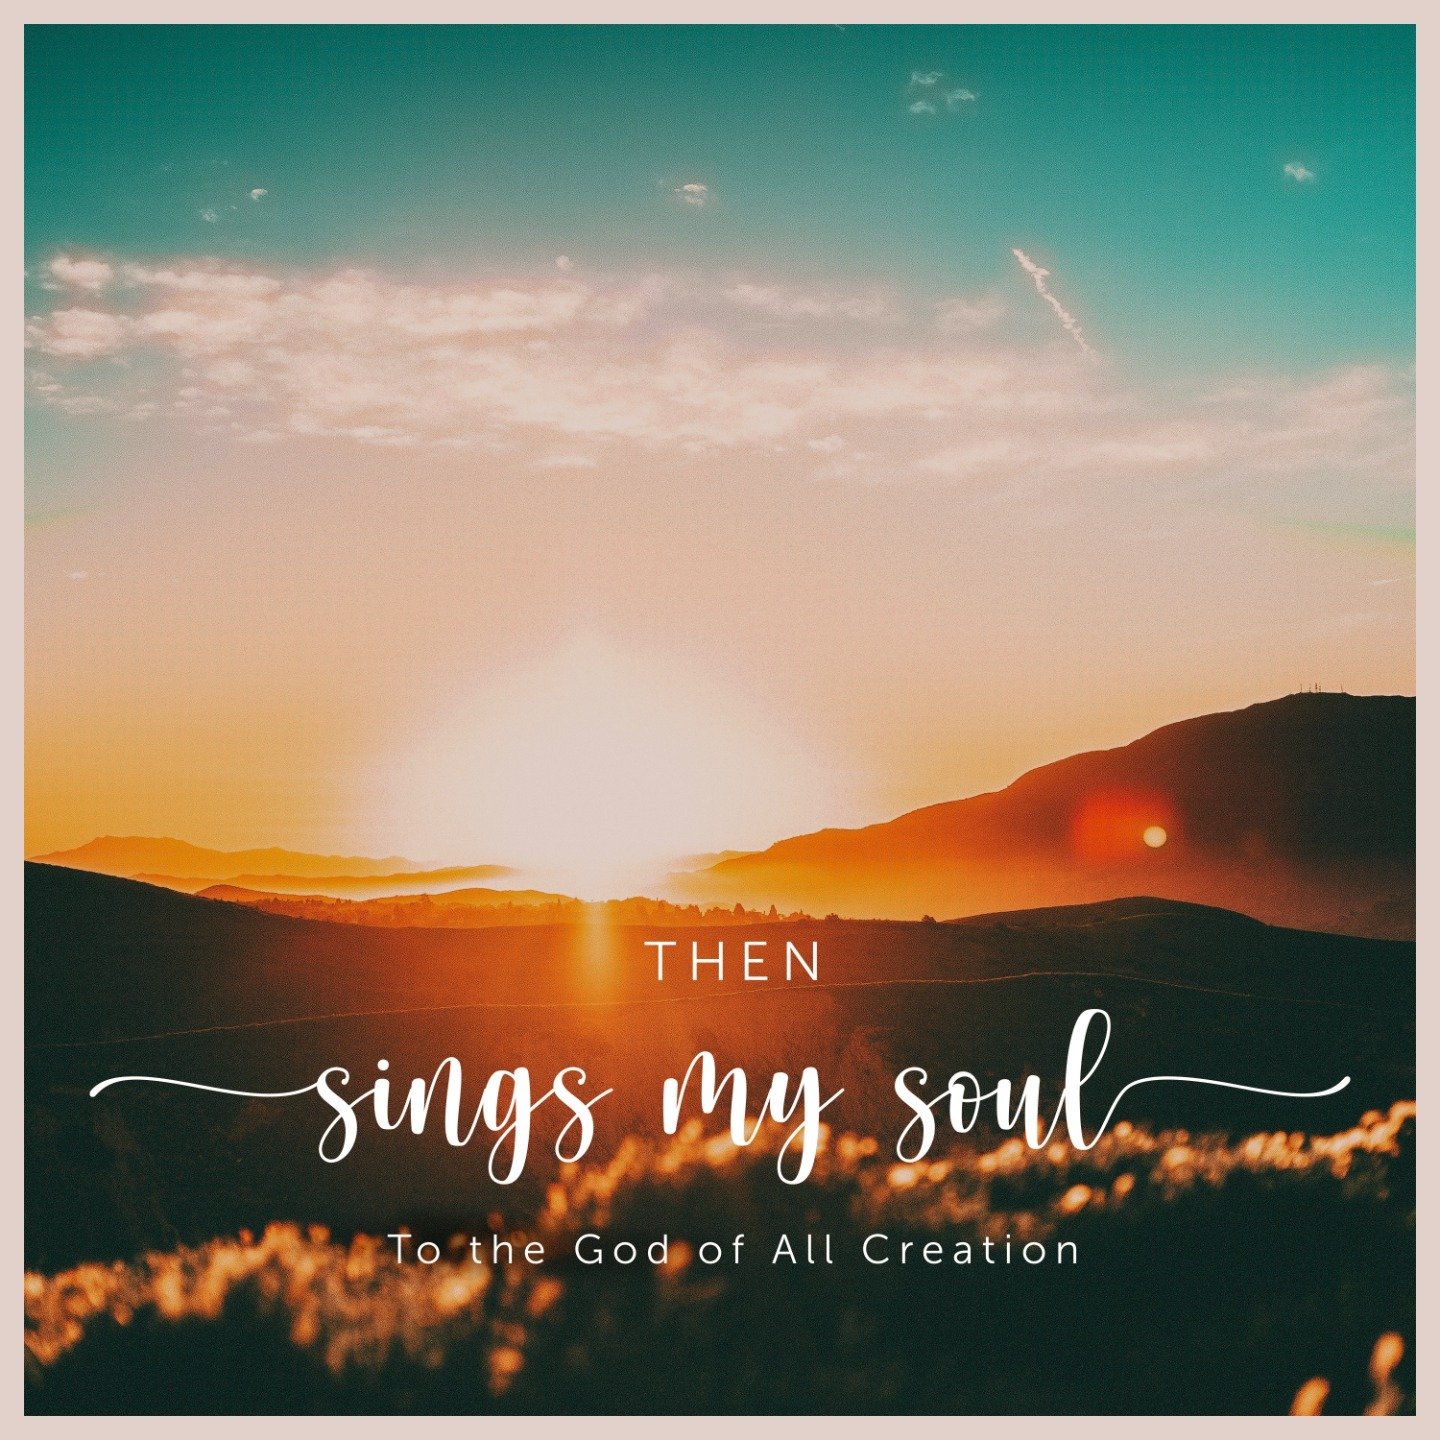 Music Ministry invites you to the Spring Concert on Saturday, May 18th, at 5pm in the Sanctuary. Join us for an inspiring evening featuring the LLUC Sanctuary Choir, Orchestra, and Male Quartet as they present &quot;Then Sings My Soul: To the God of 